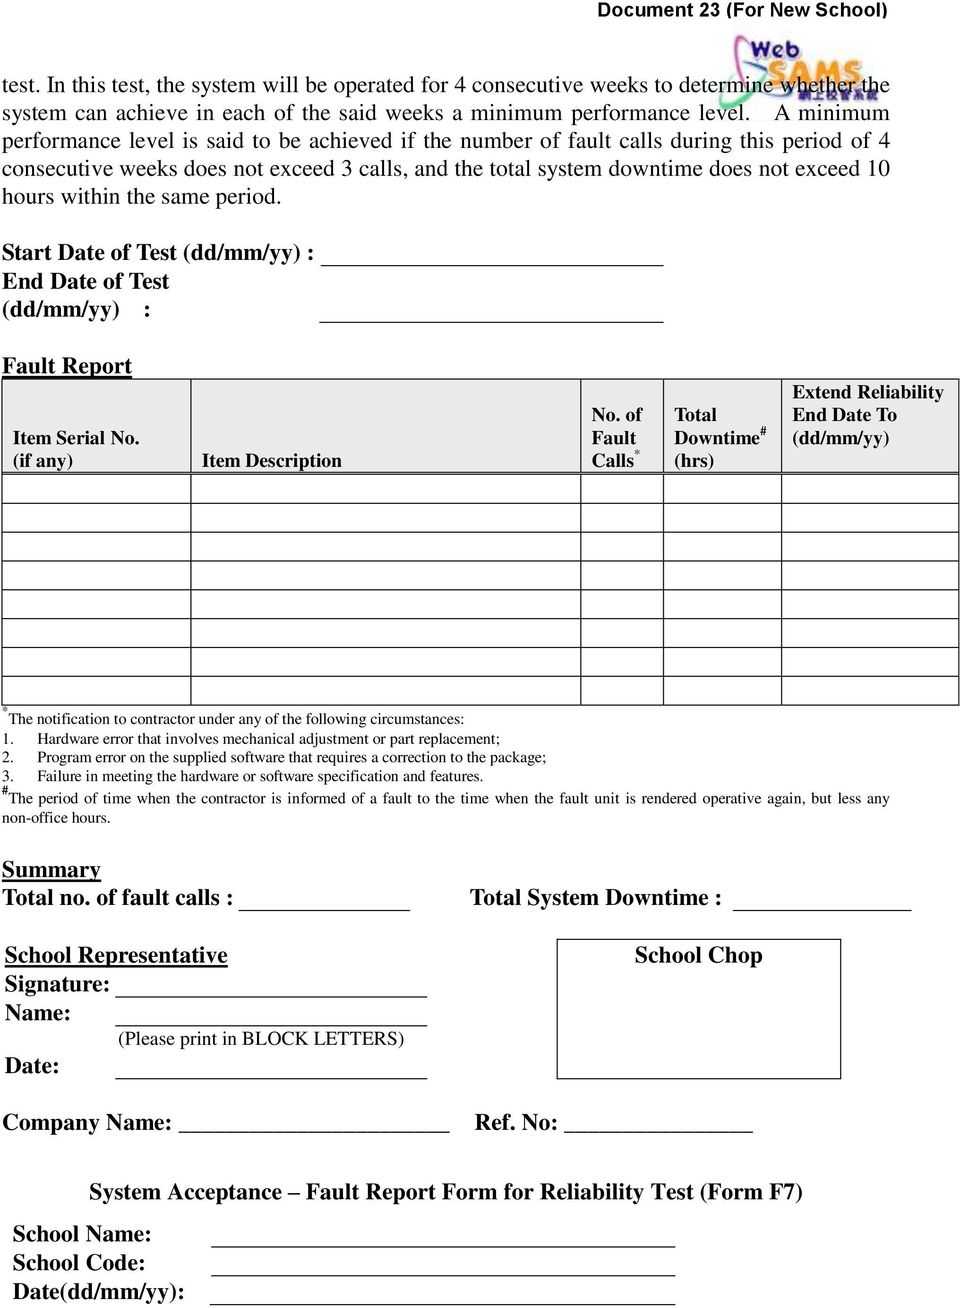 Sample Of Hardware Equipment Acceptance Form – Pdf Free Download Throughout Equipment Fault Report Template